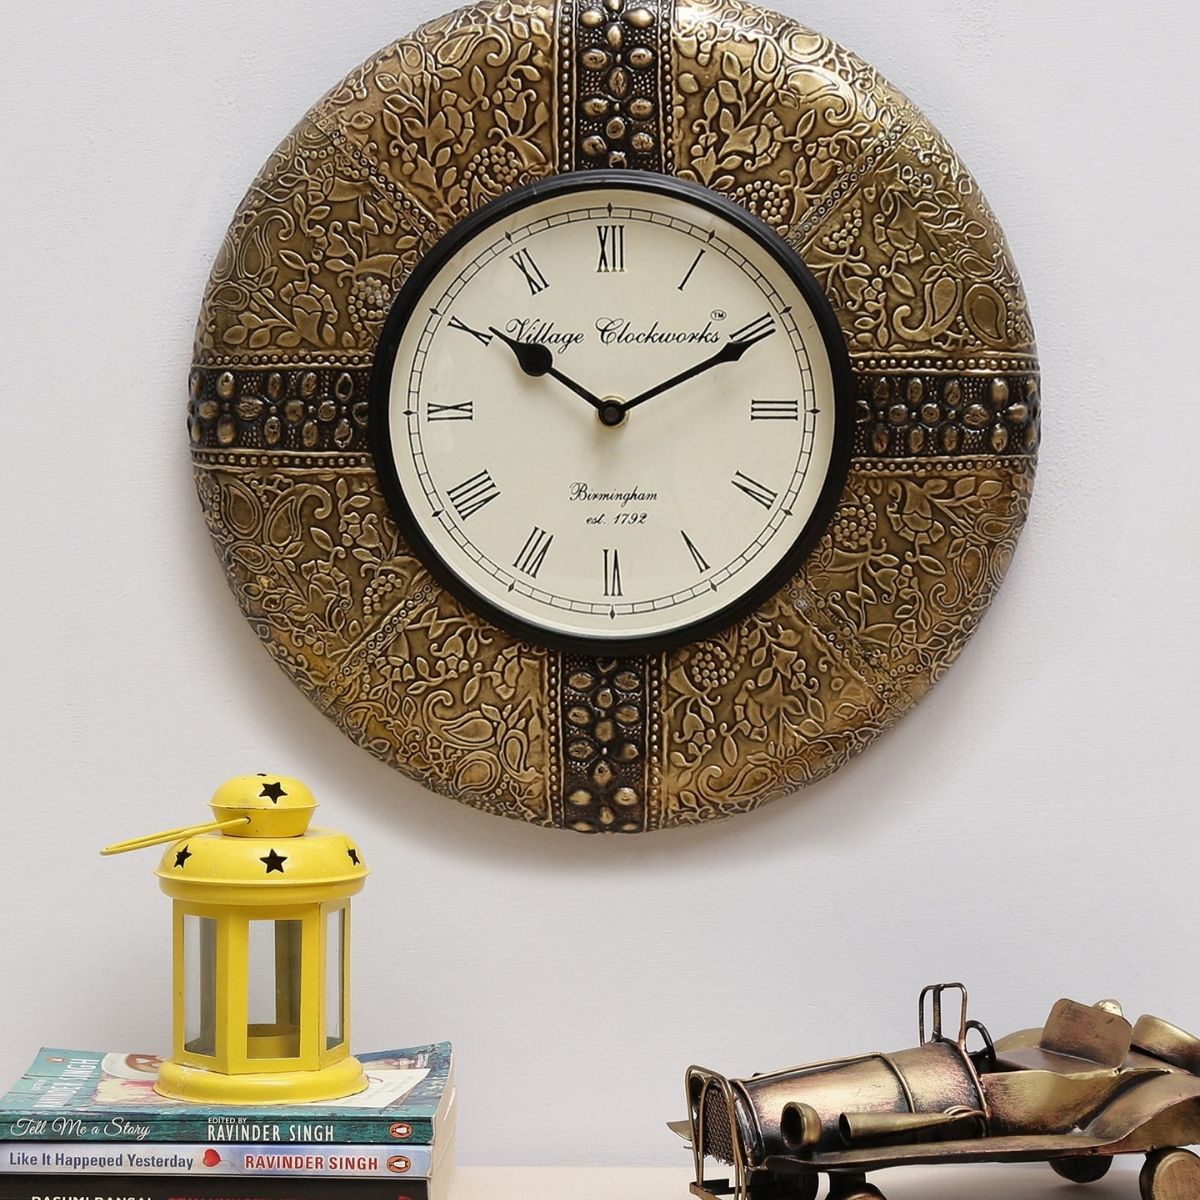 Vintage wall clockBuy this Amazing Vintage Wall Clock for your Home Decor